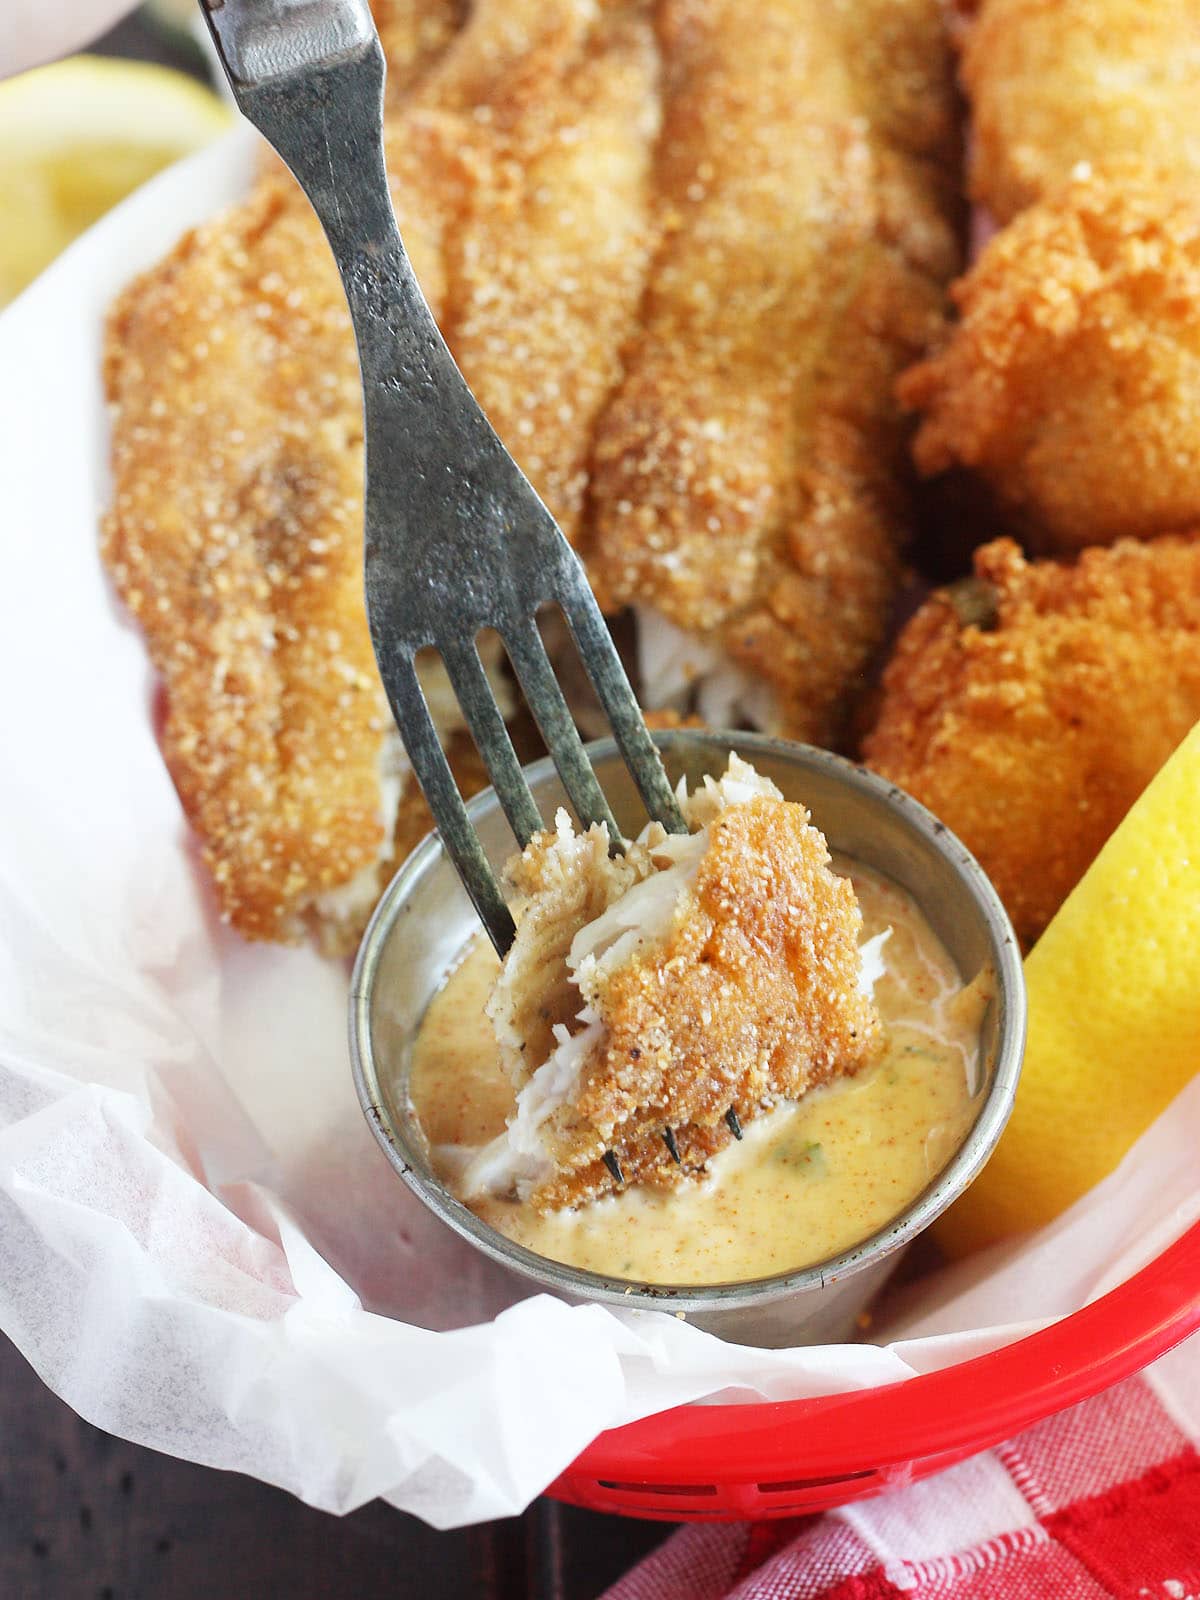 forkful of fried catfish being dipped in remoulade sauce